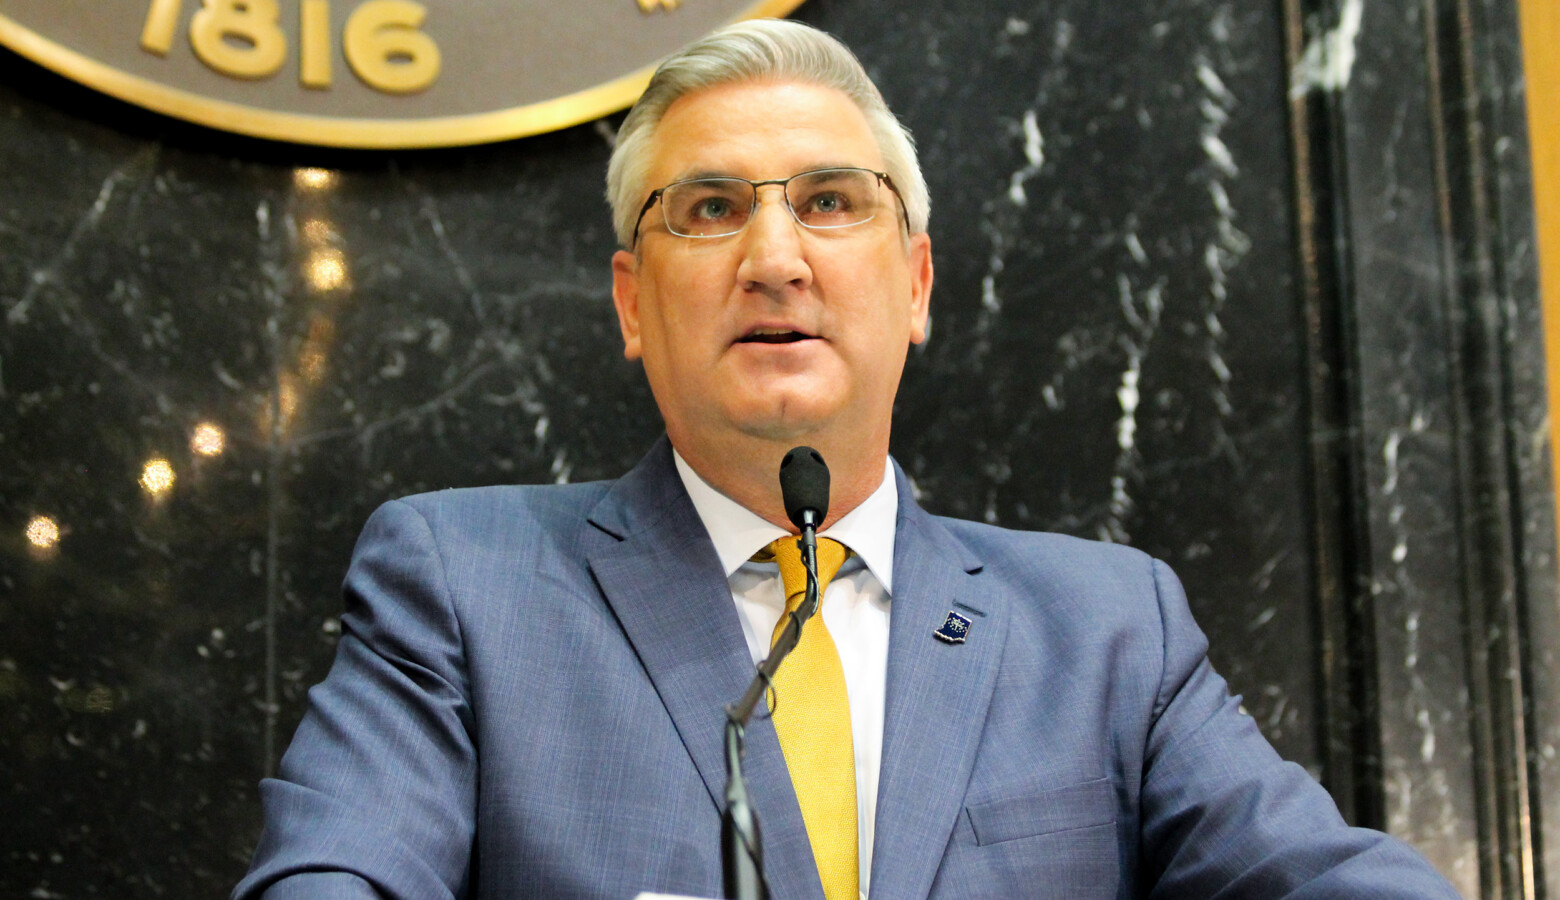 Gov. Eric Holcomb's many executive orders aimed at addressing COVID-19 were made possible when he declared a public health emergency on March 6. (Lauren Chapman/IPB News)